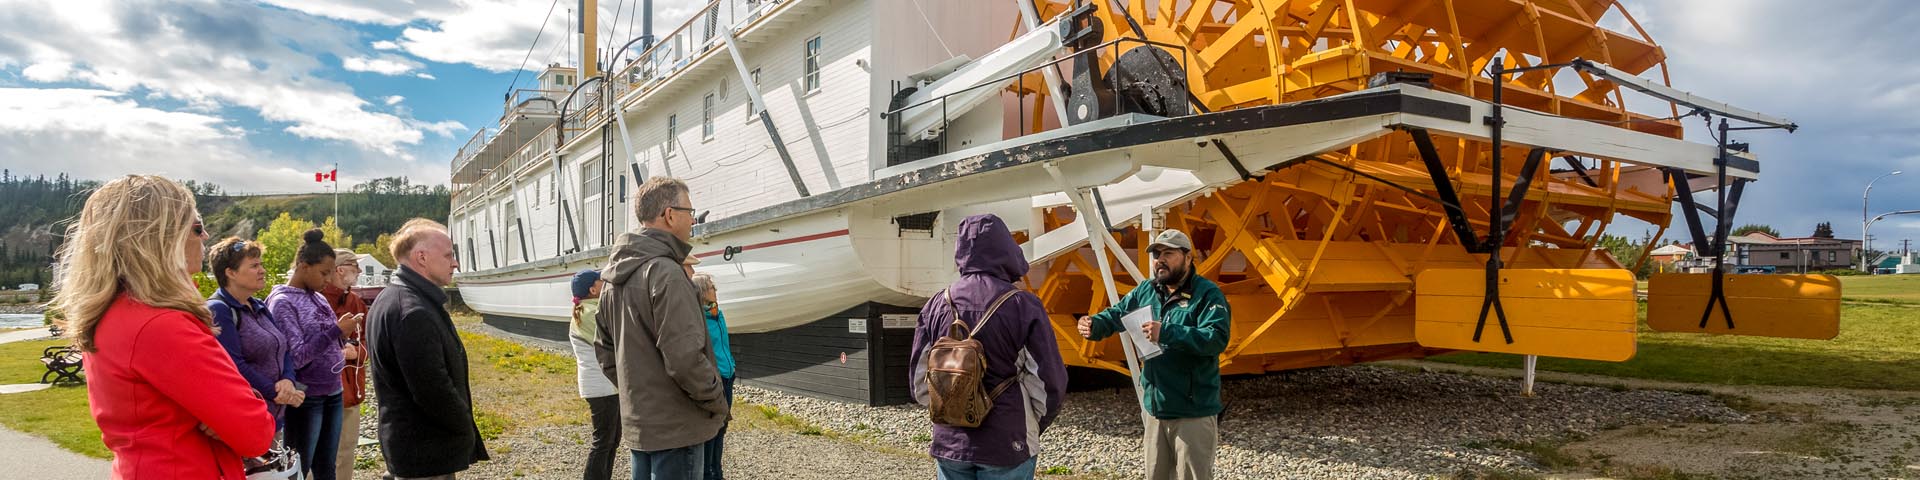 A Parks Canada interpreter talking to visitors next to the boat at the S.S. Klondike National Historic Site.